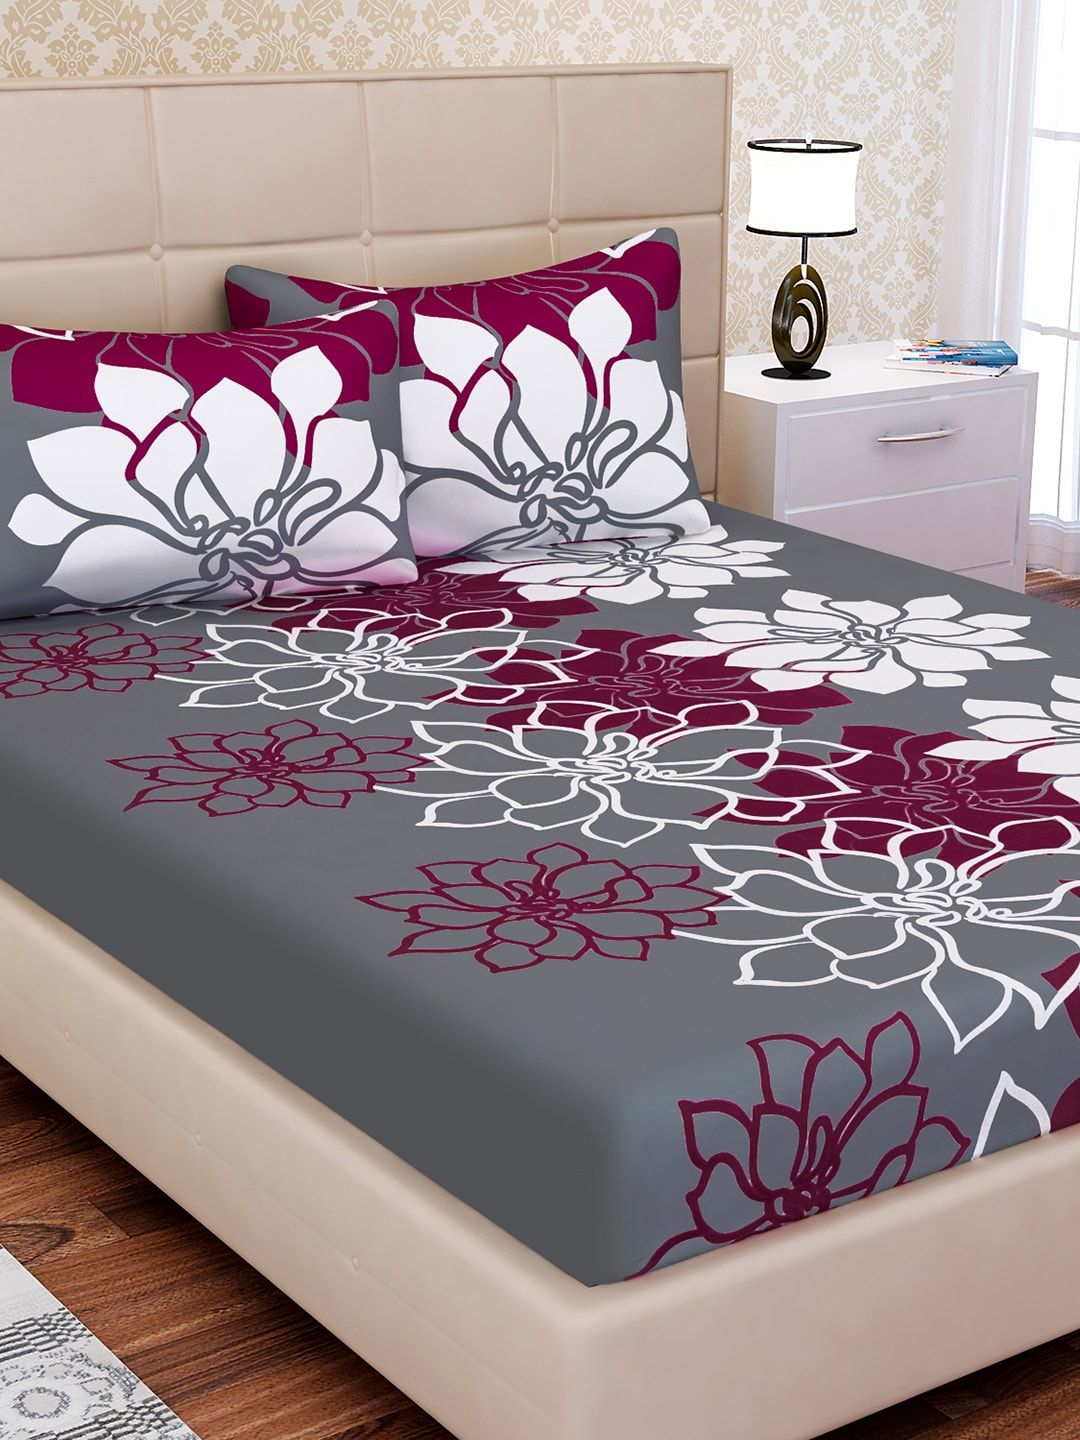 SEJ by Nisha Gupta Grey & Pink Floral 144 TC Cotton 1 King Bedsheet with 2 Pillow Covers Price in India